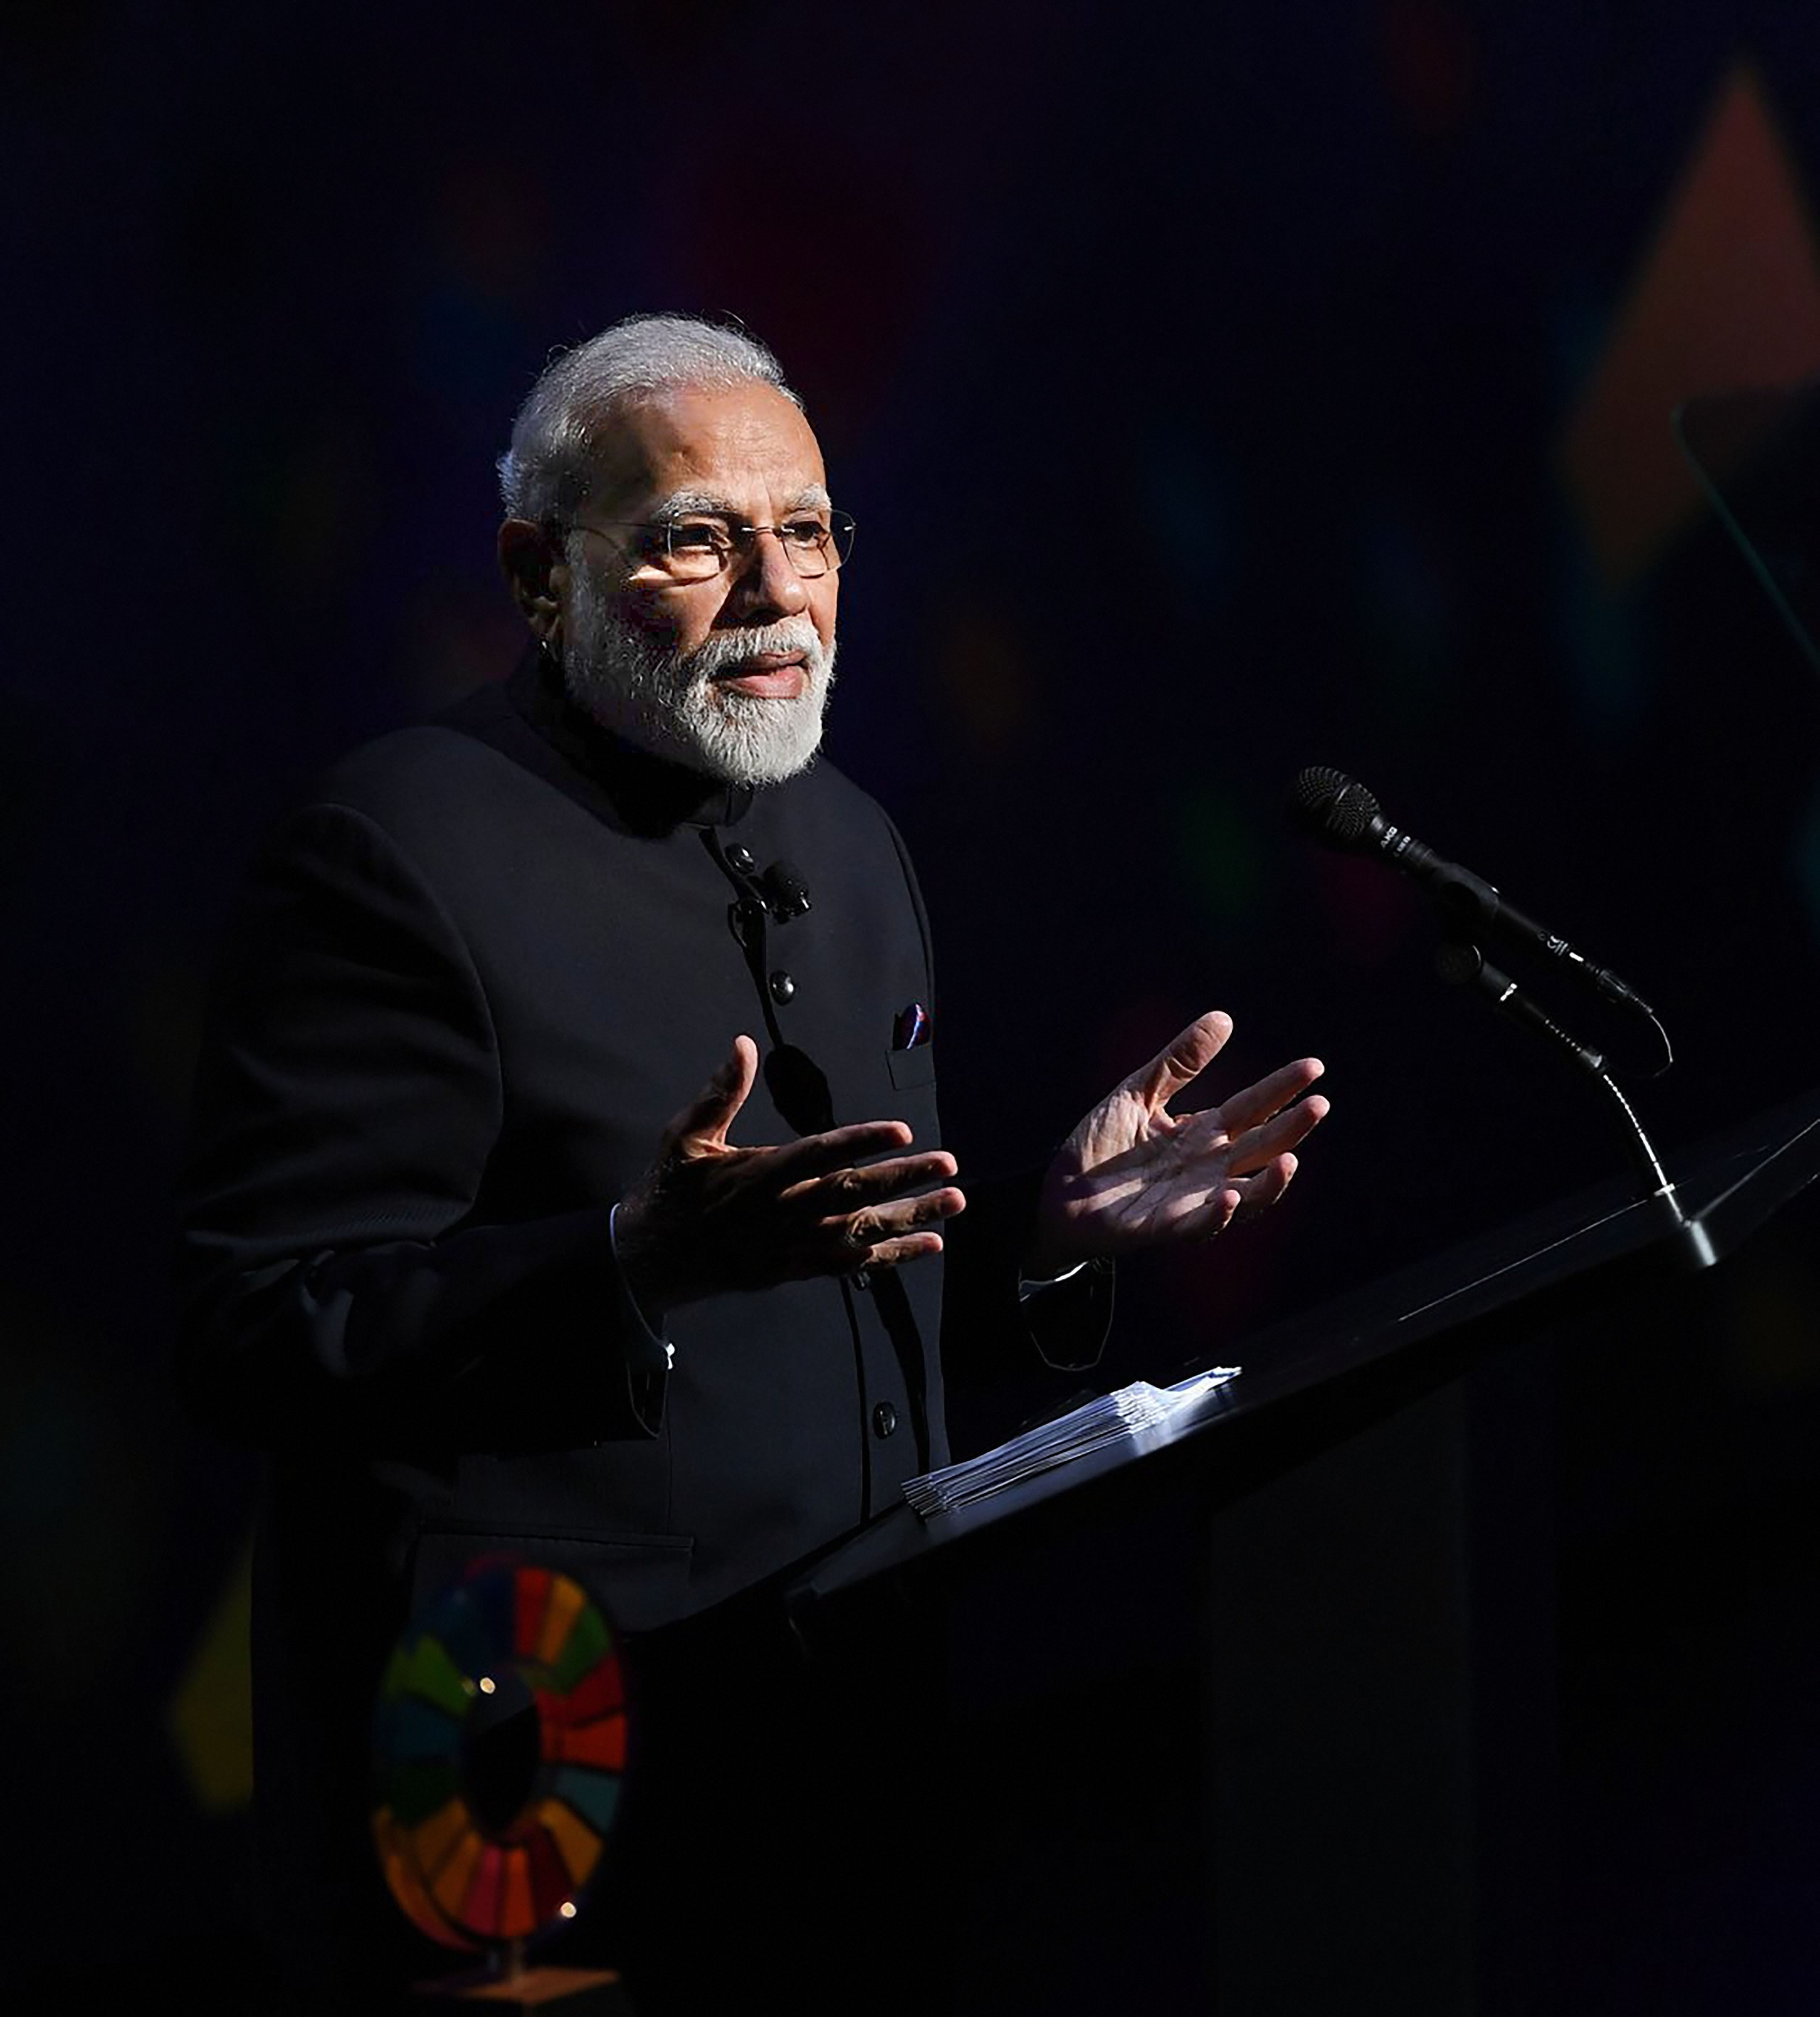 Prime Minister Narendra Modi addresses the crowd after being given the Global Goalkeeper Award by Bill and Melinda Gates Foundation for the Swachh Bharat Abhiyan launched by his government, in New York City, Wednesday, September 25, 2019